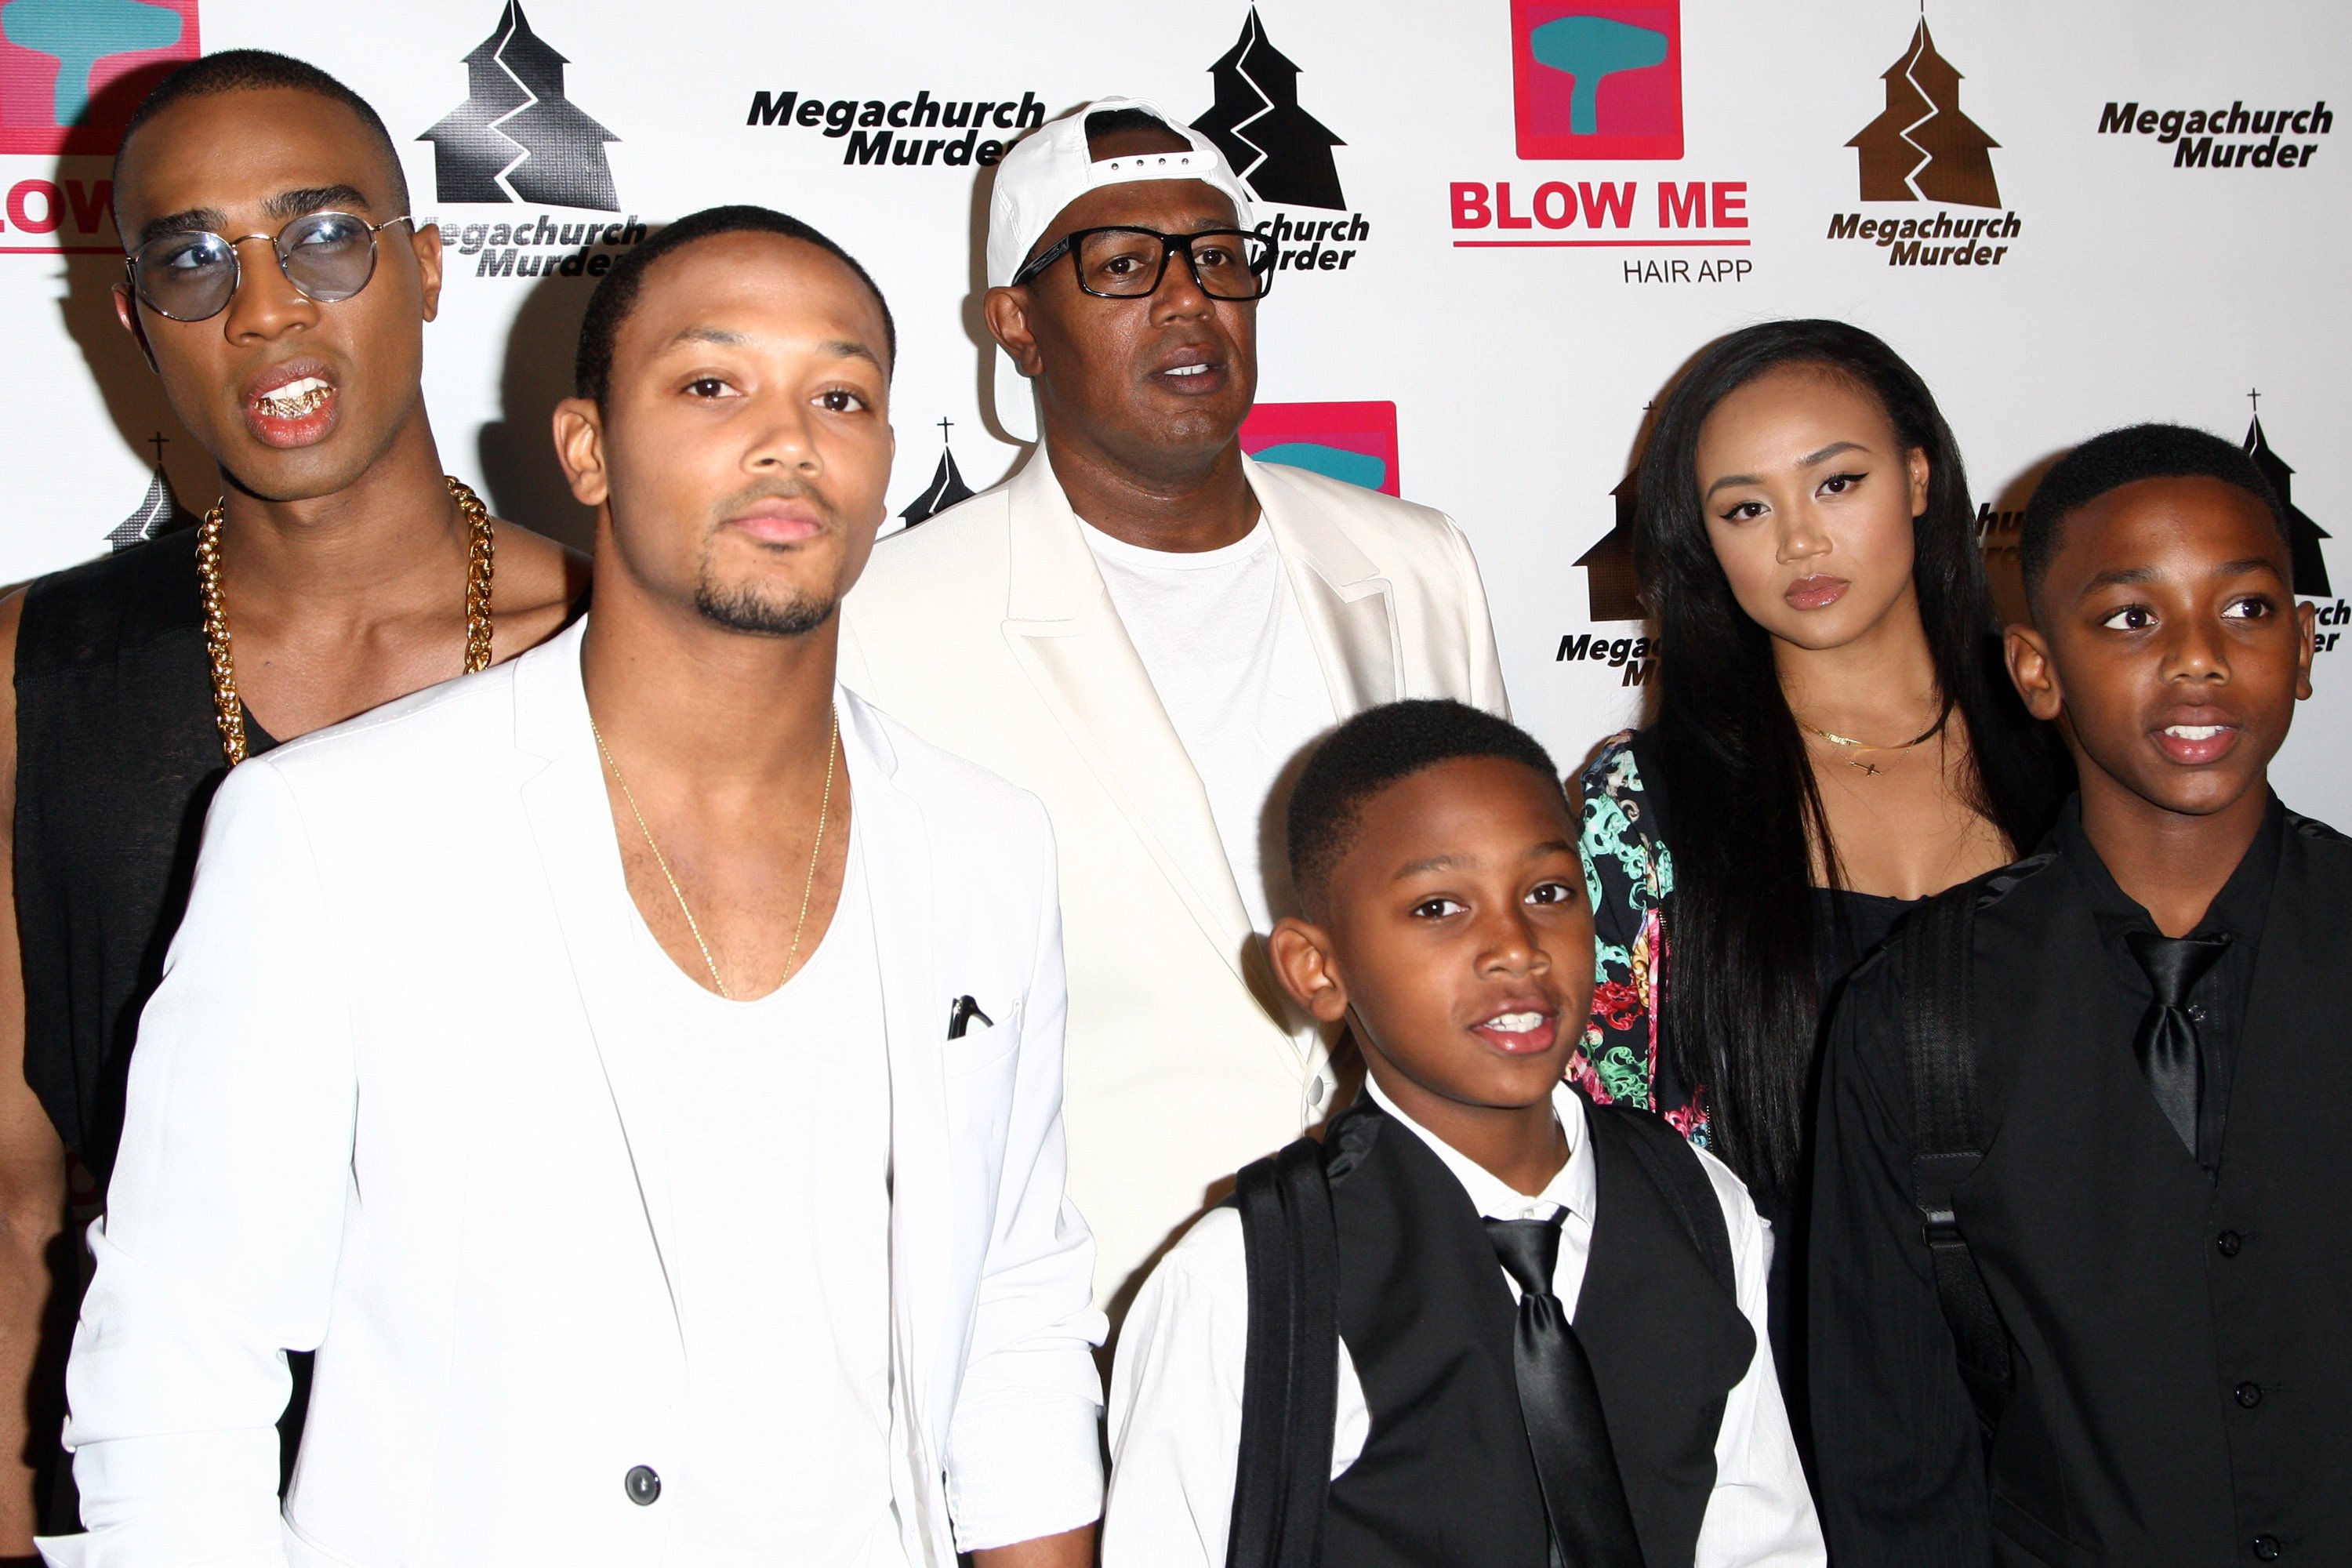 Rappers Romeo Miller aka Lil' Romeo (L), Master P (C) and his family attend the "Megachurch Murder" premiere screening at Harmony Gold Theater on January 29, 2015 in Los Angeles, California.  |  Source: Getty Images